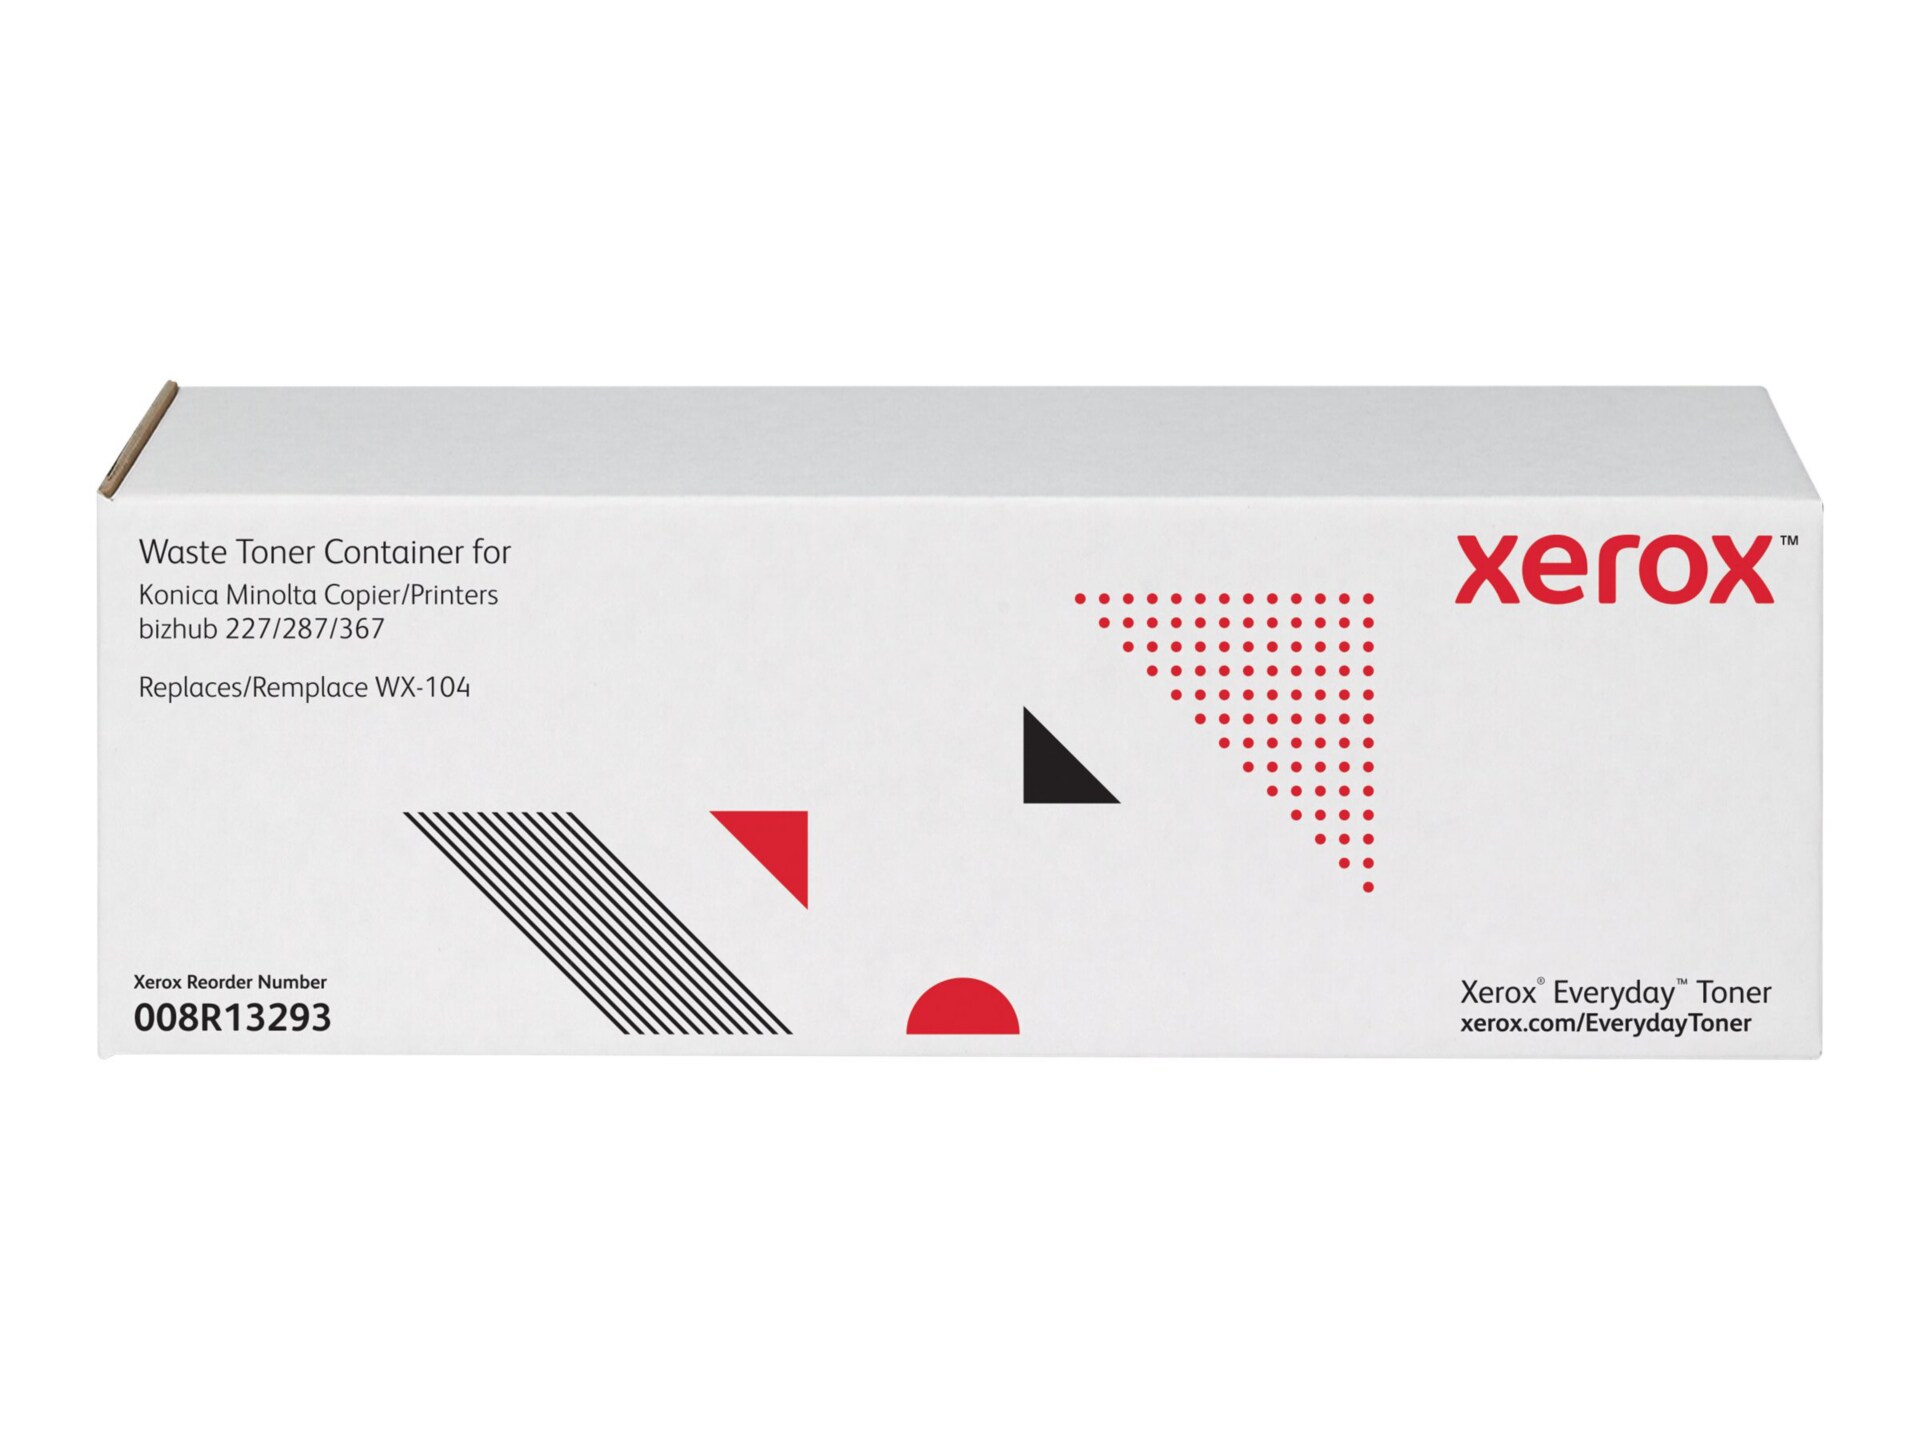 Xerox Everyday Waste Toner Cartridge,replacement for Konica Minolta A7XWWY2